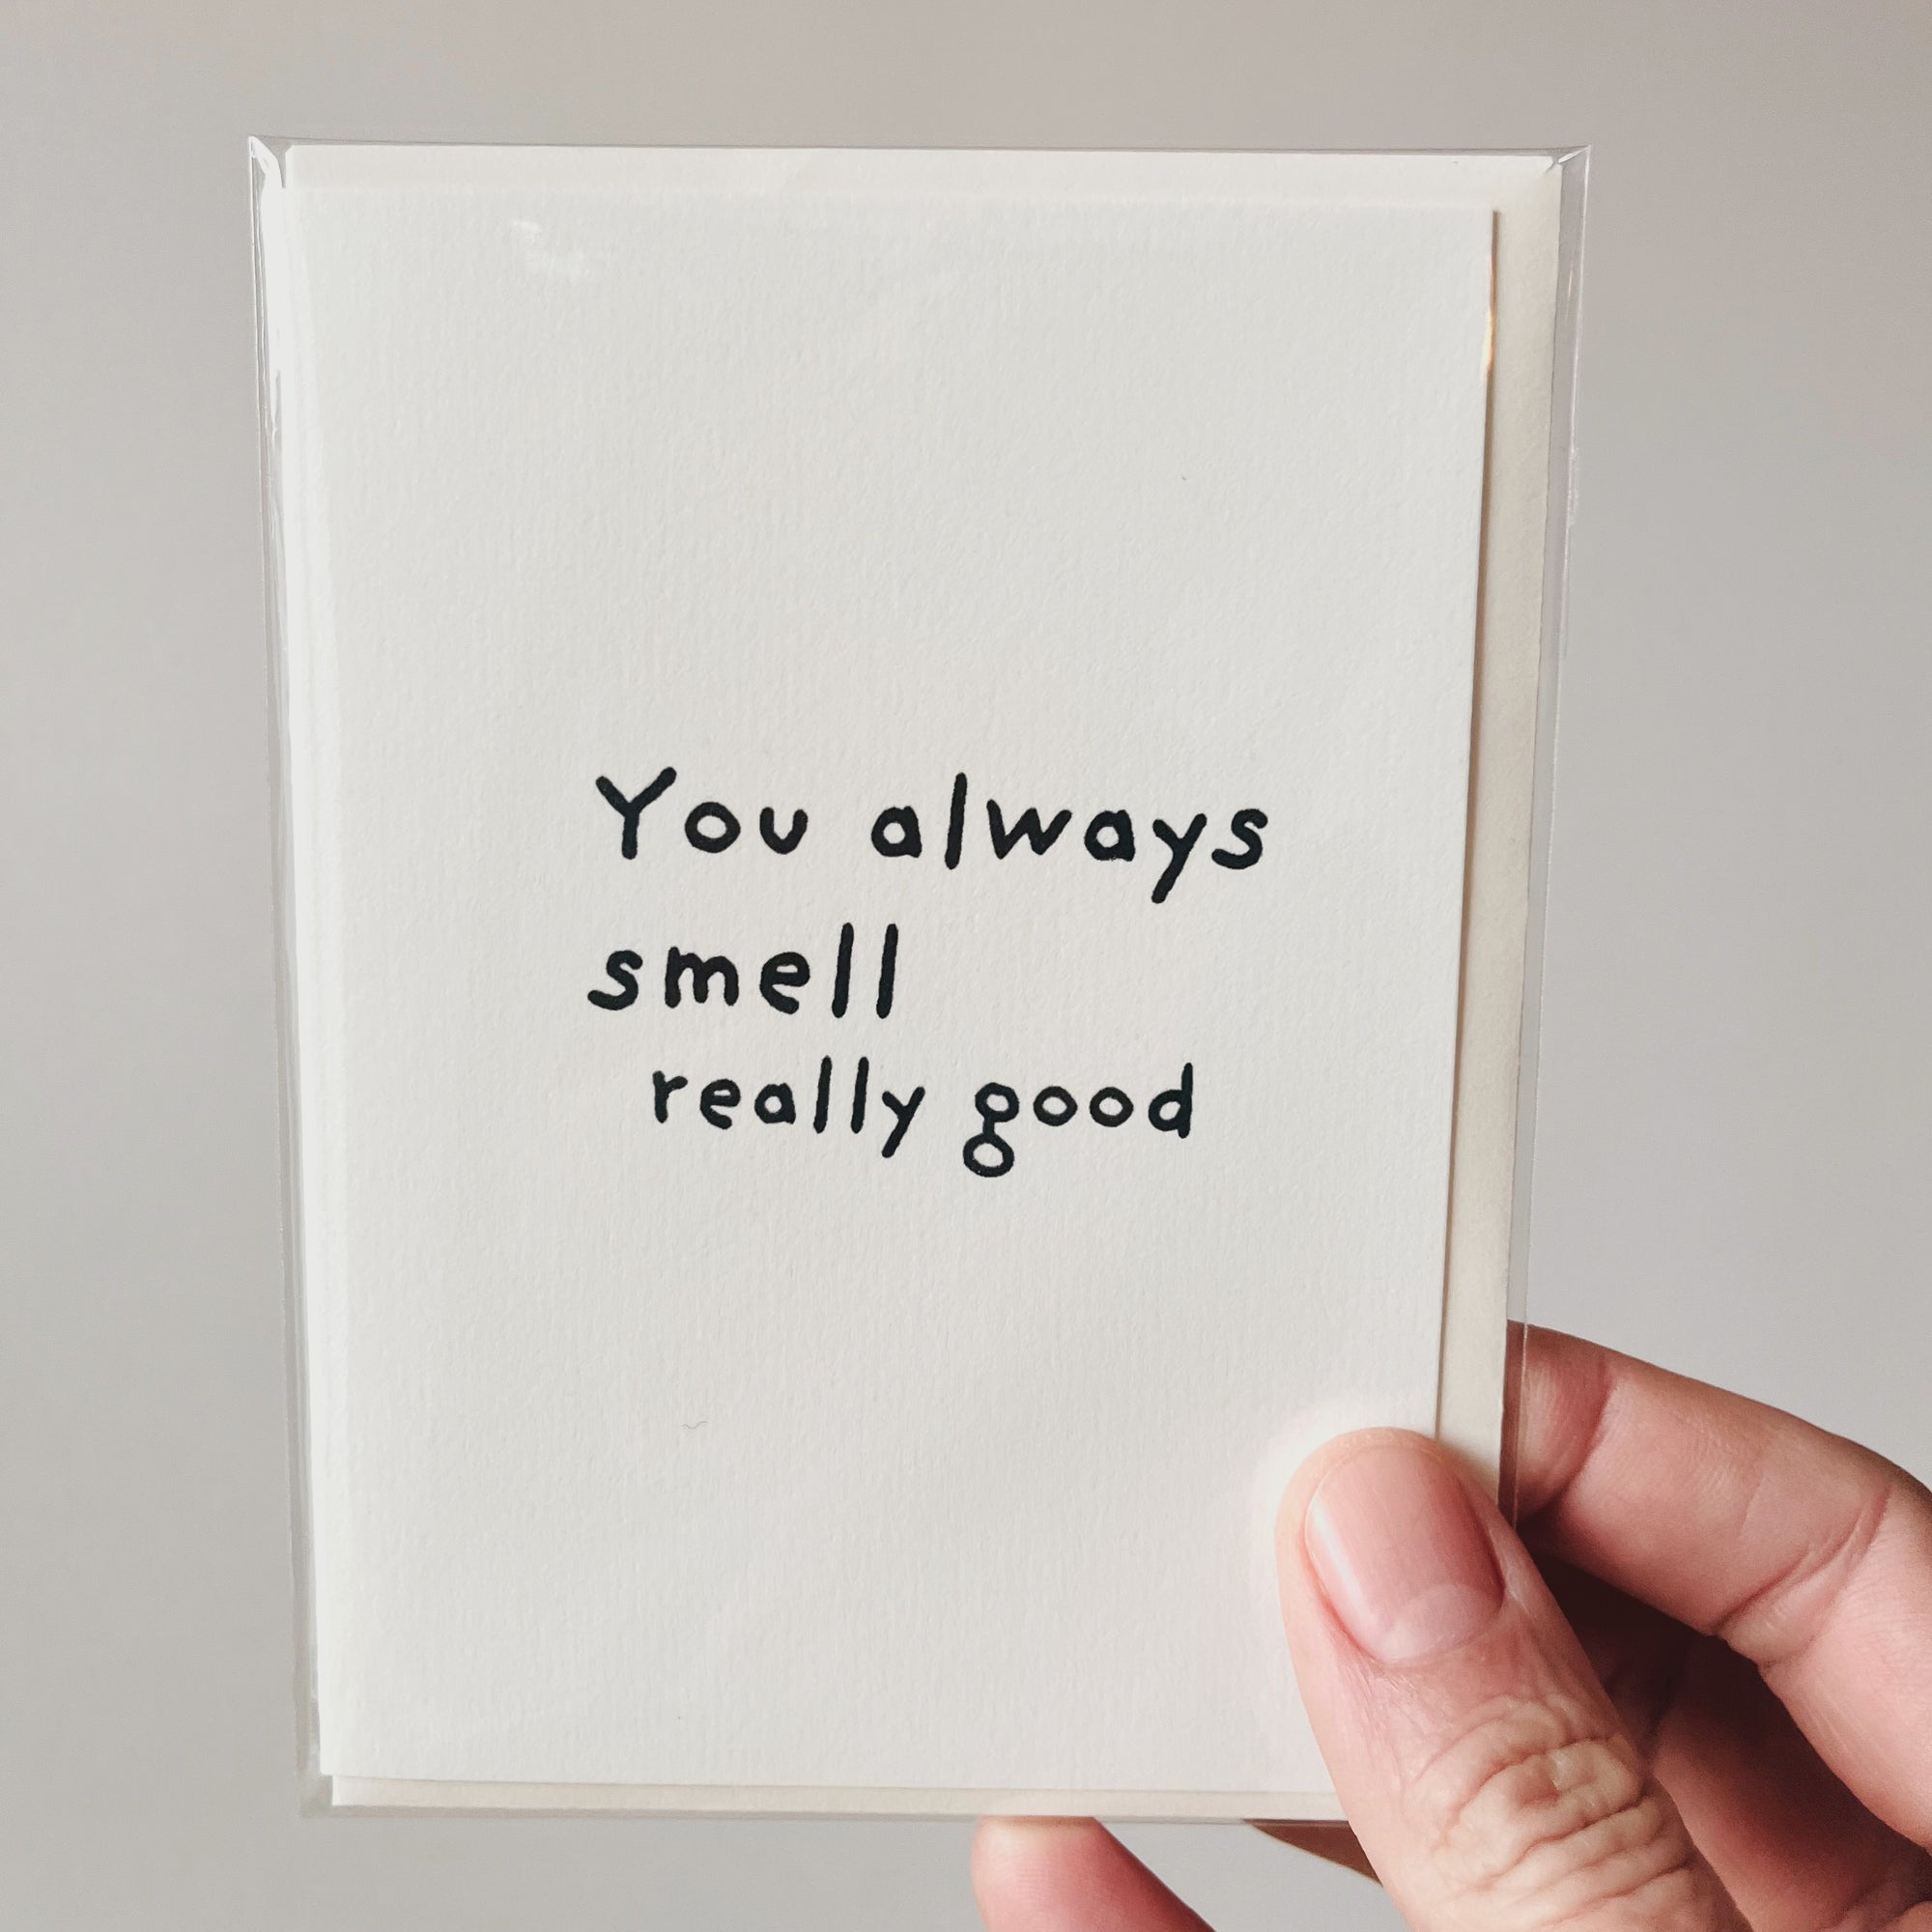 You always smell really good.